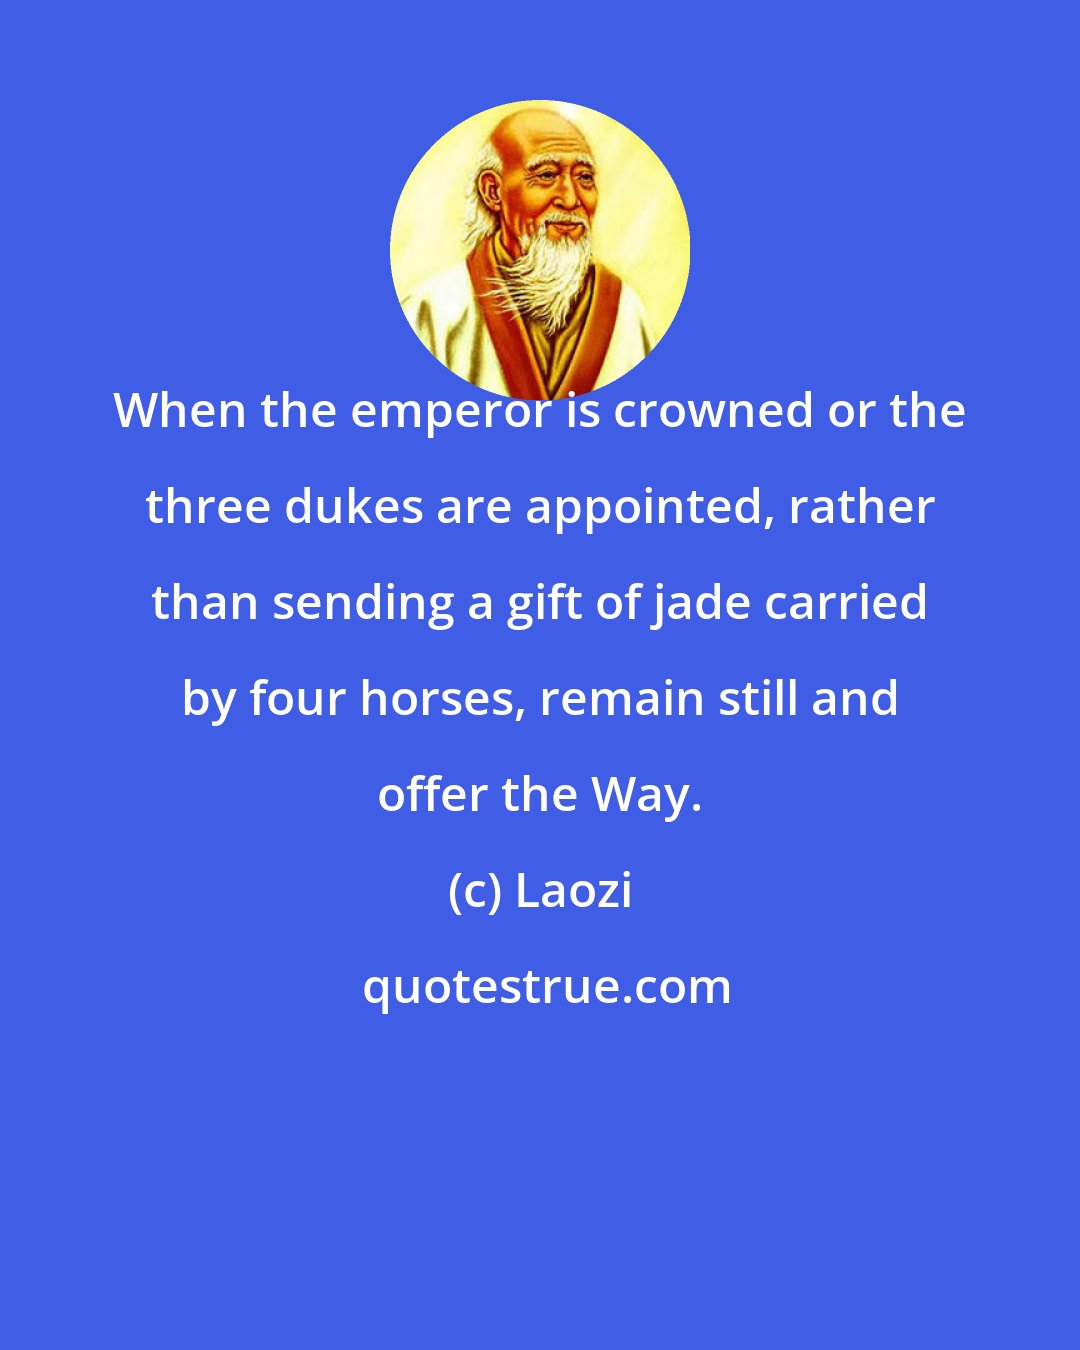 Laozi: When the emperor is crowned or the three dukes are appointed, rather than sending a gift of jade carried by four horses, remain still and offer the Way.